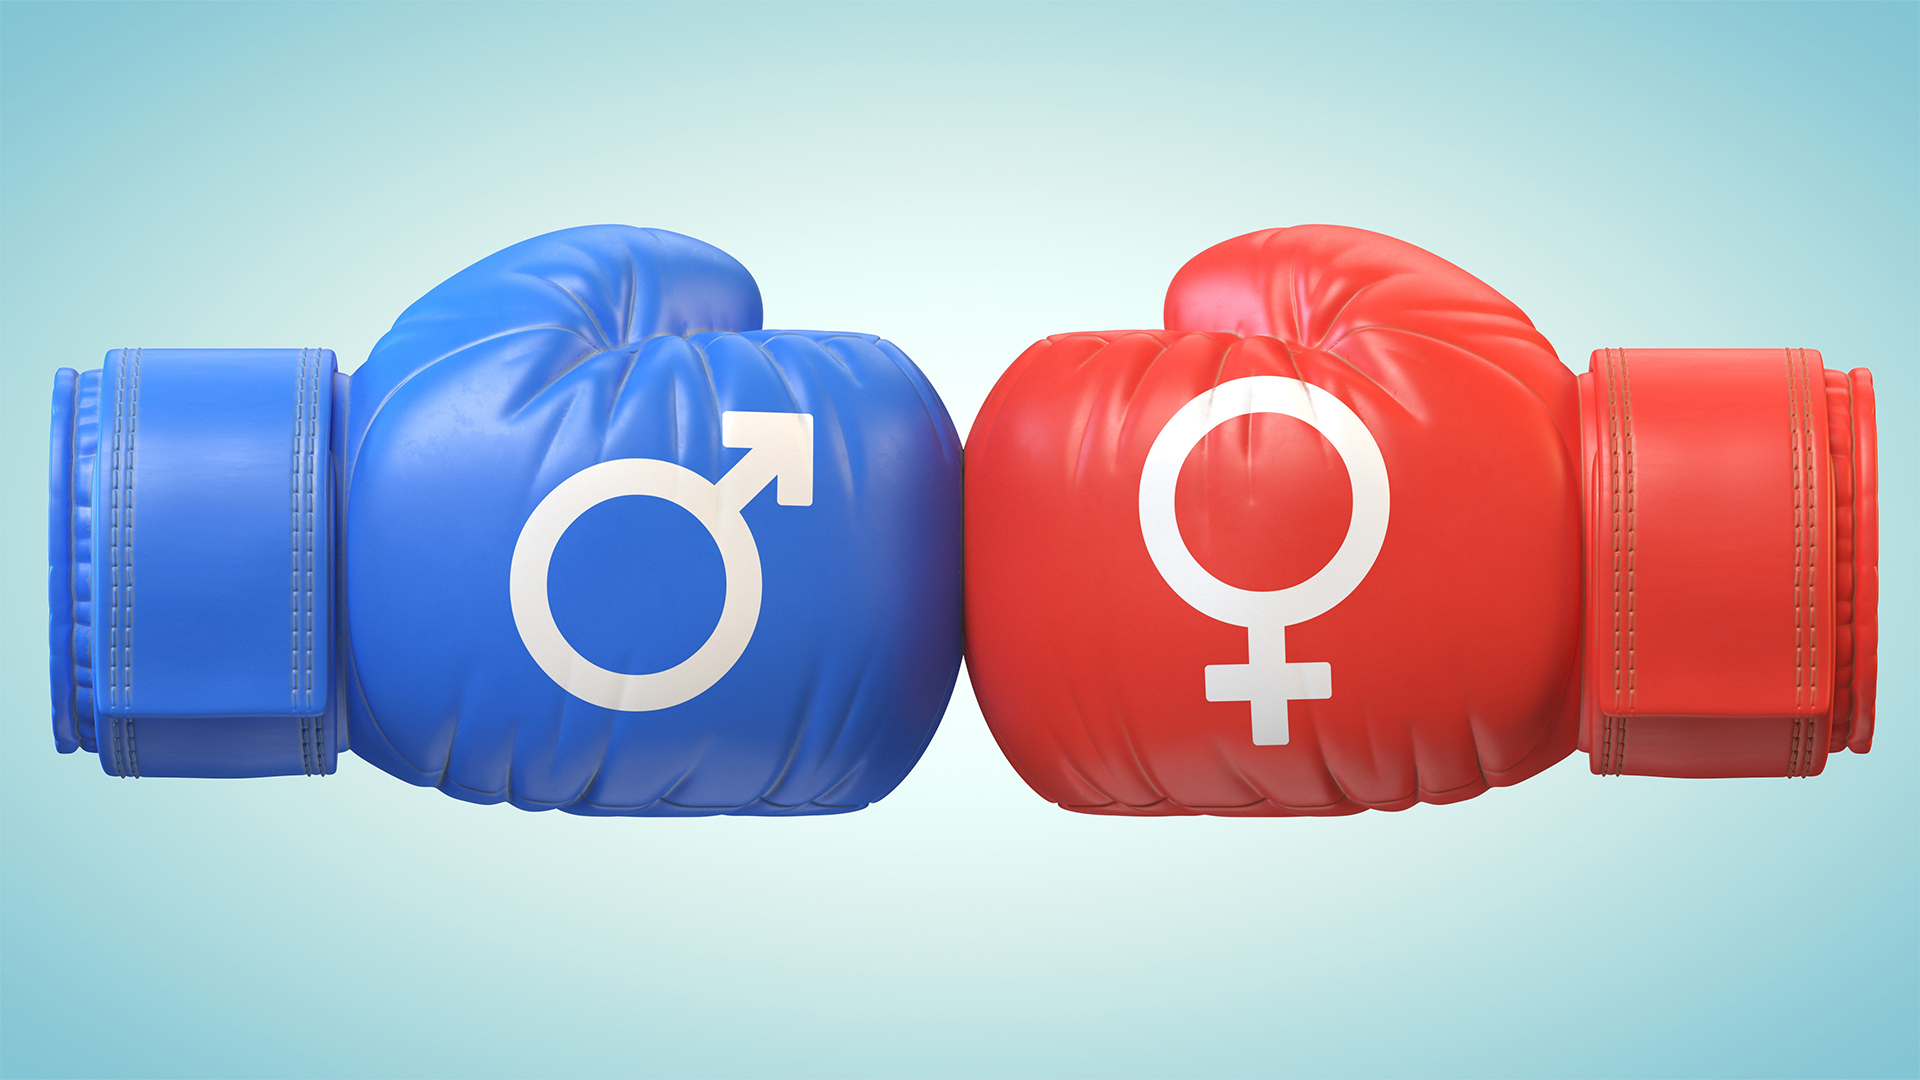 Gender, Competitiveness and How We Advocate for Others